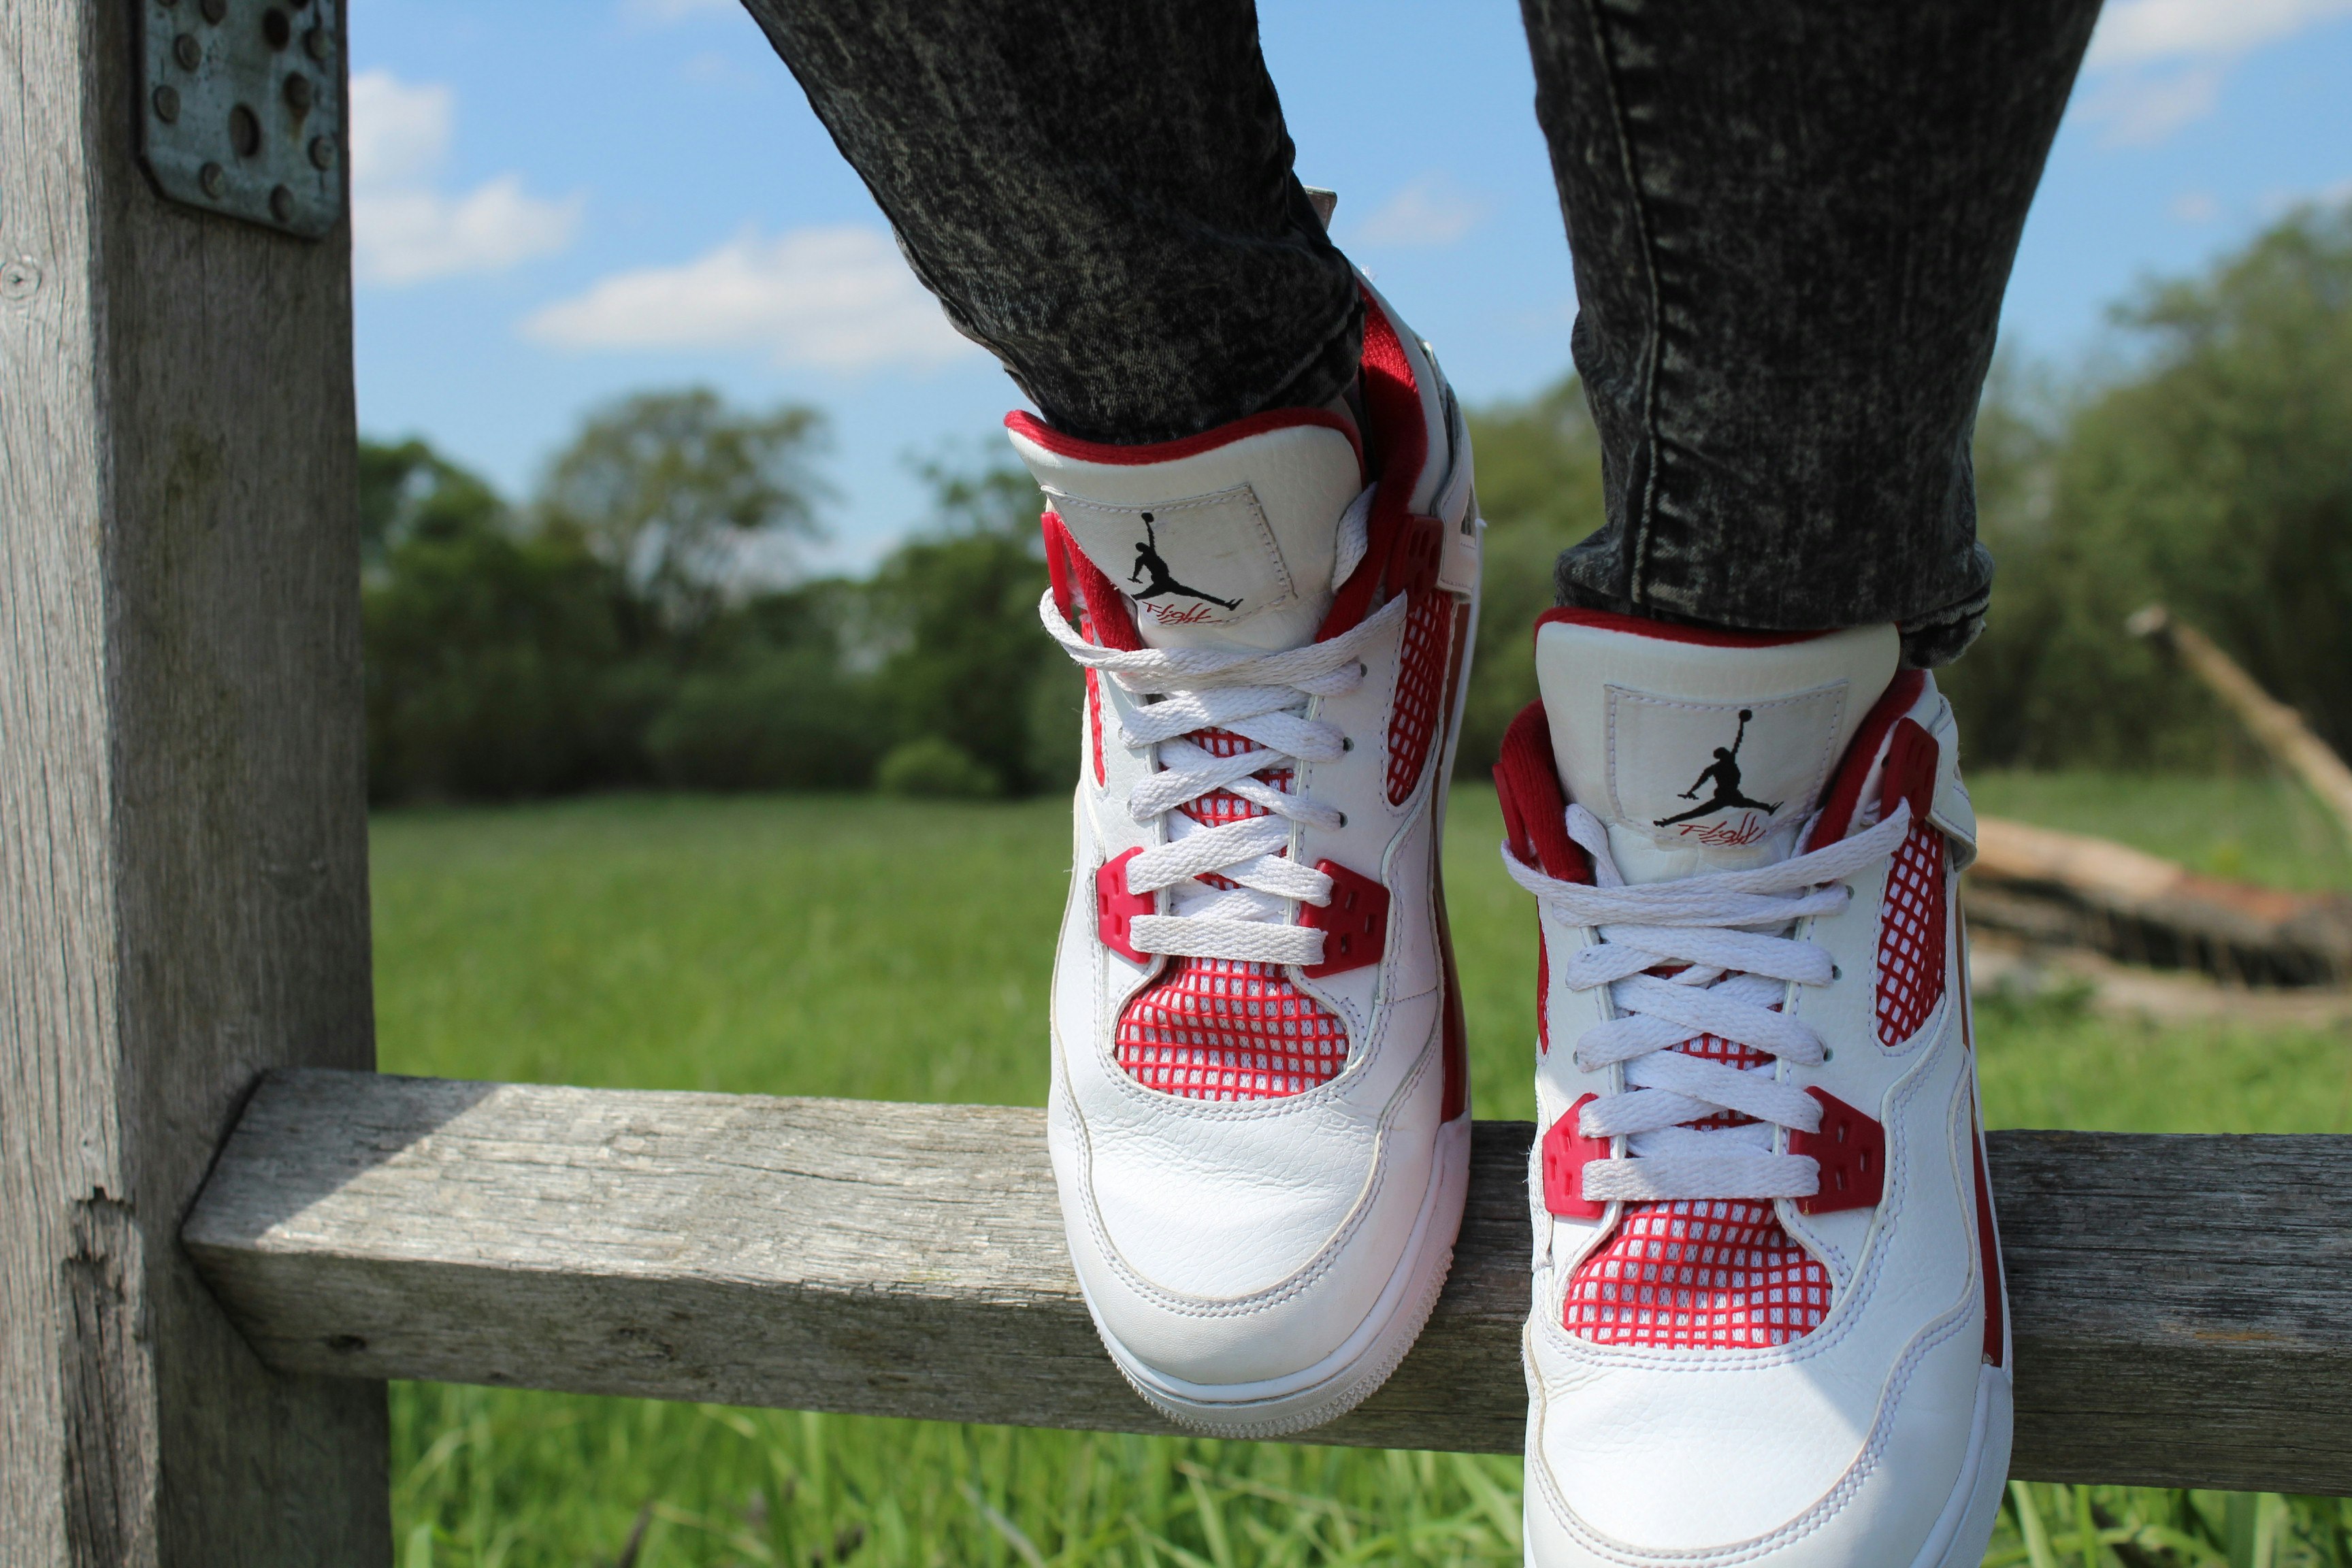 person wearing pair of red-and-white Air Jordan shoes